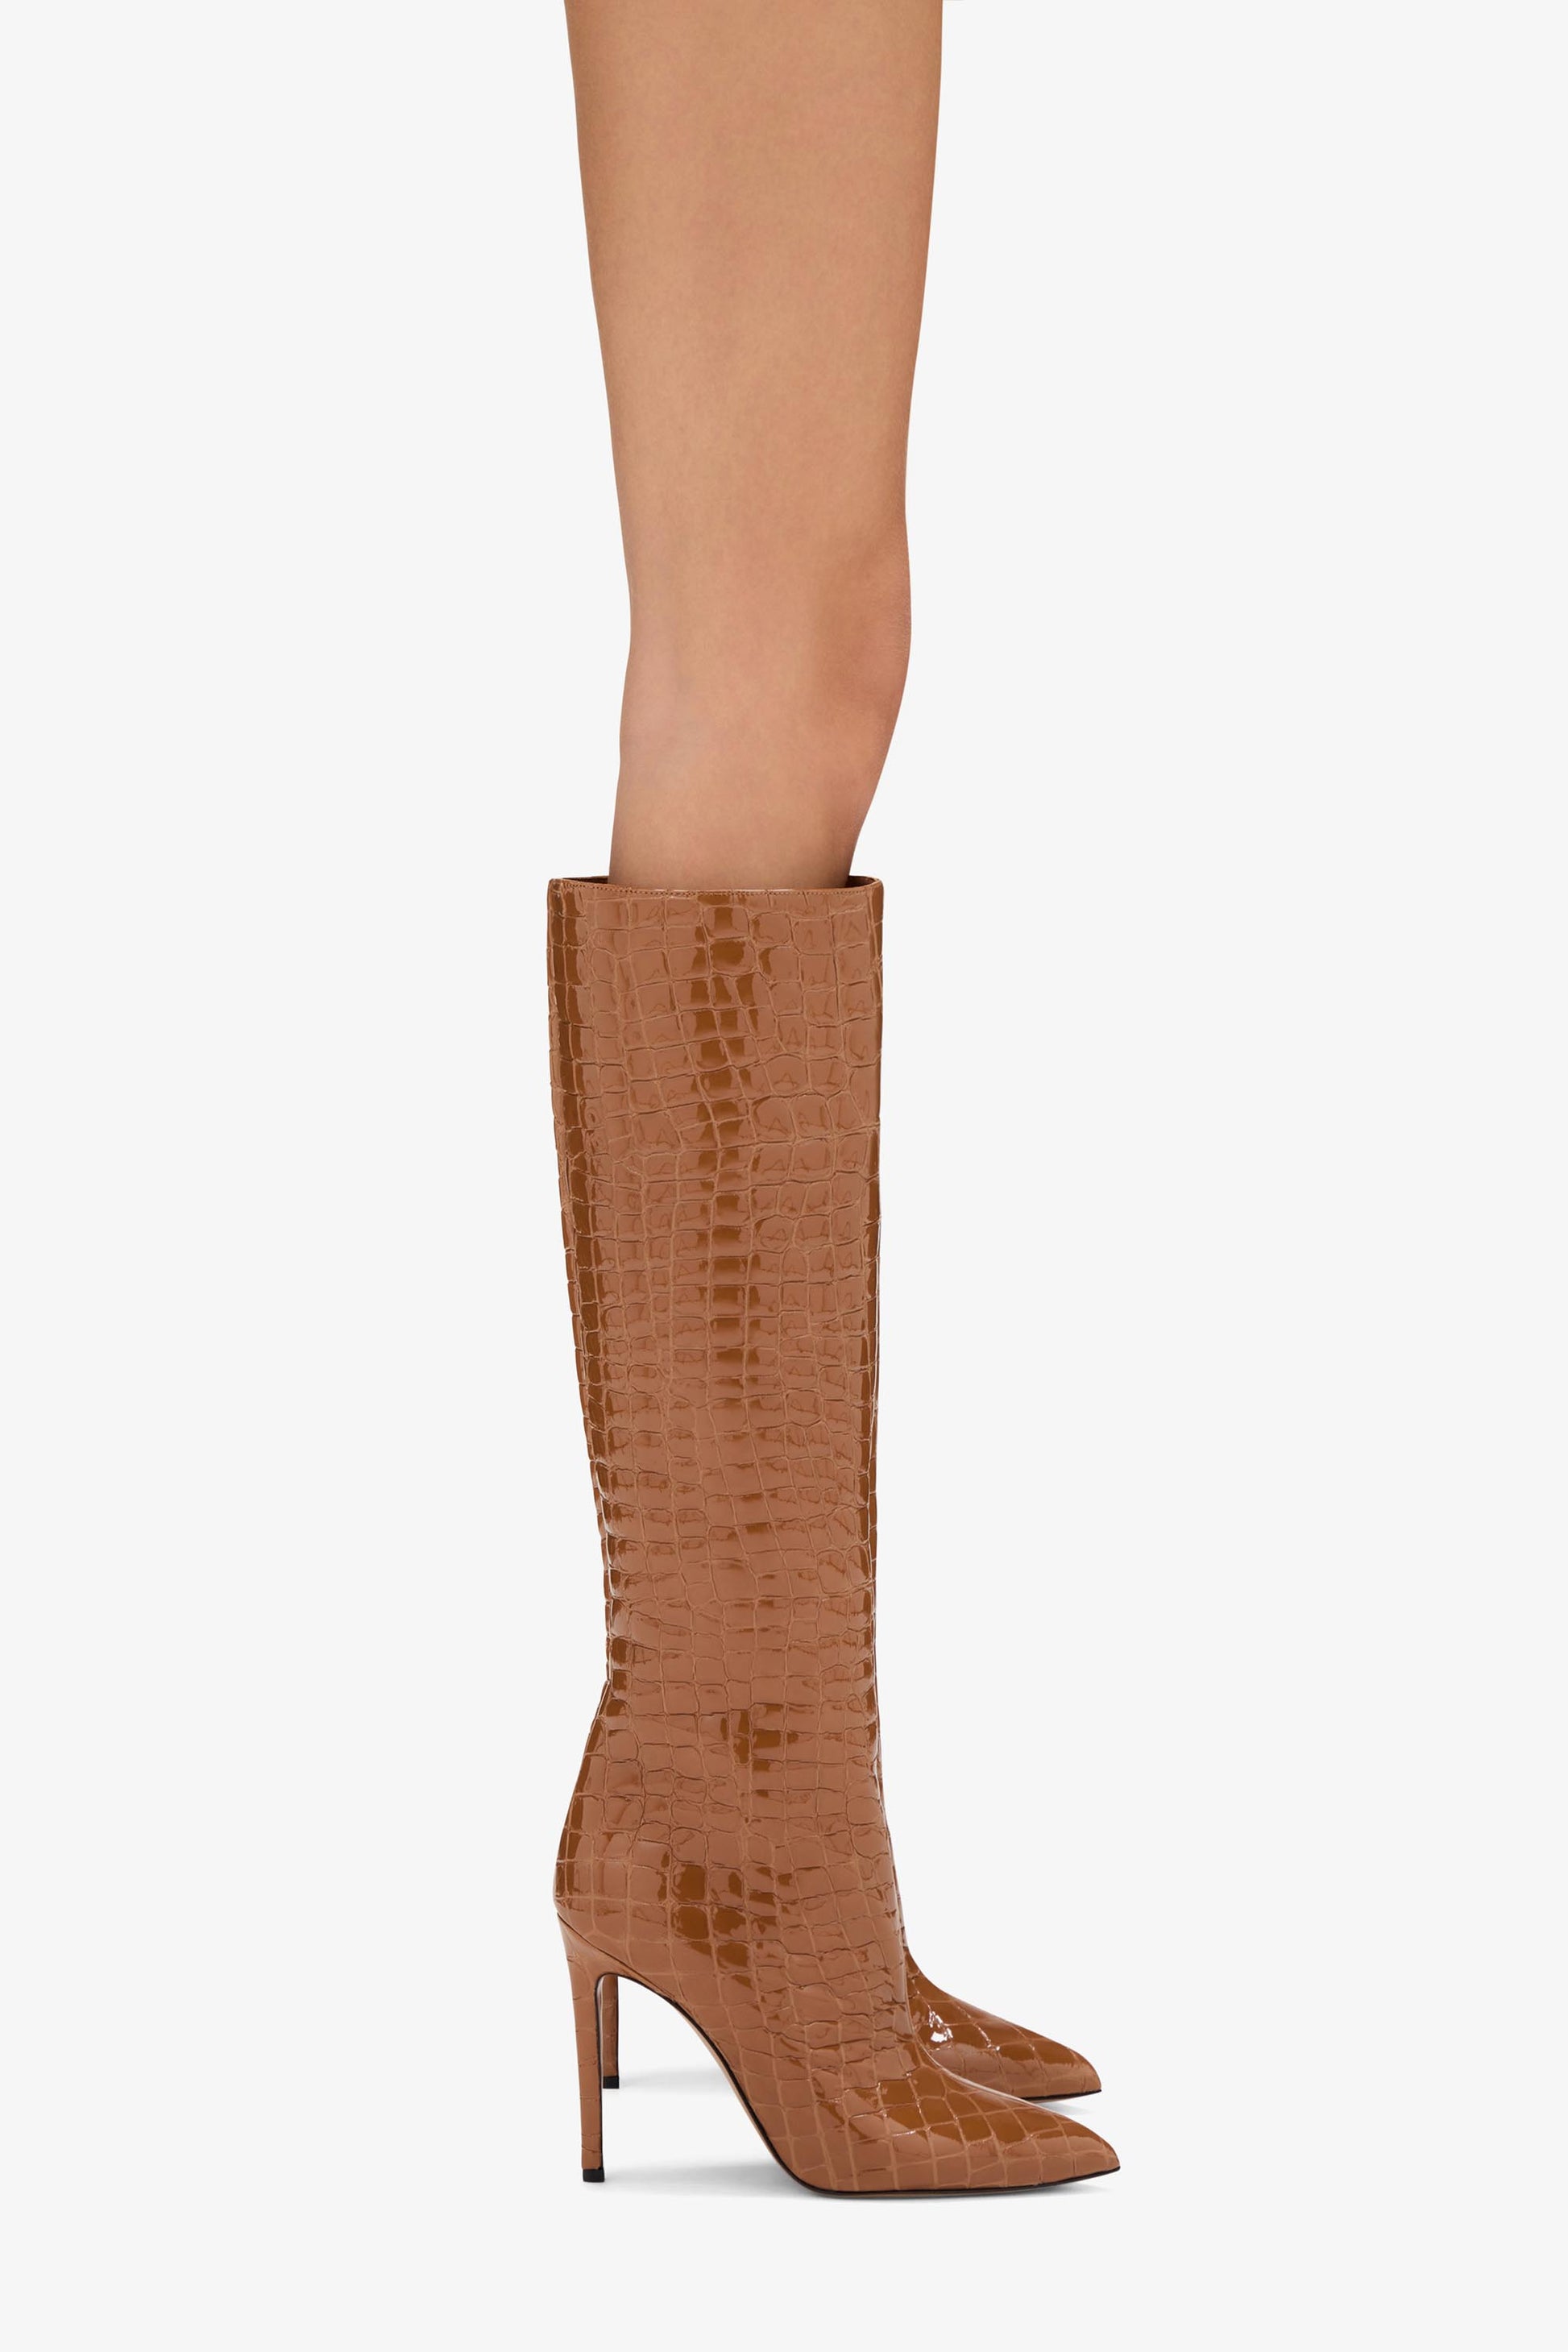 Tan embossed leather boot - Product worn